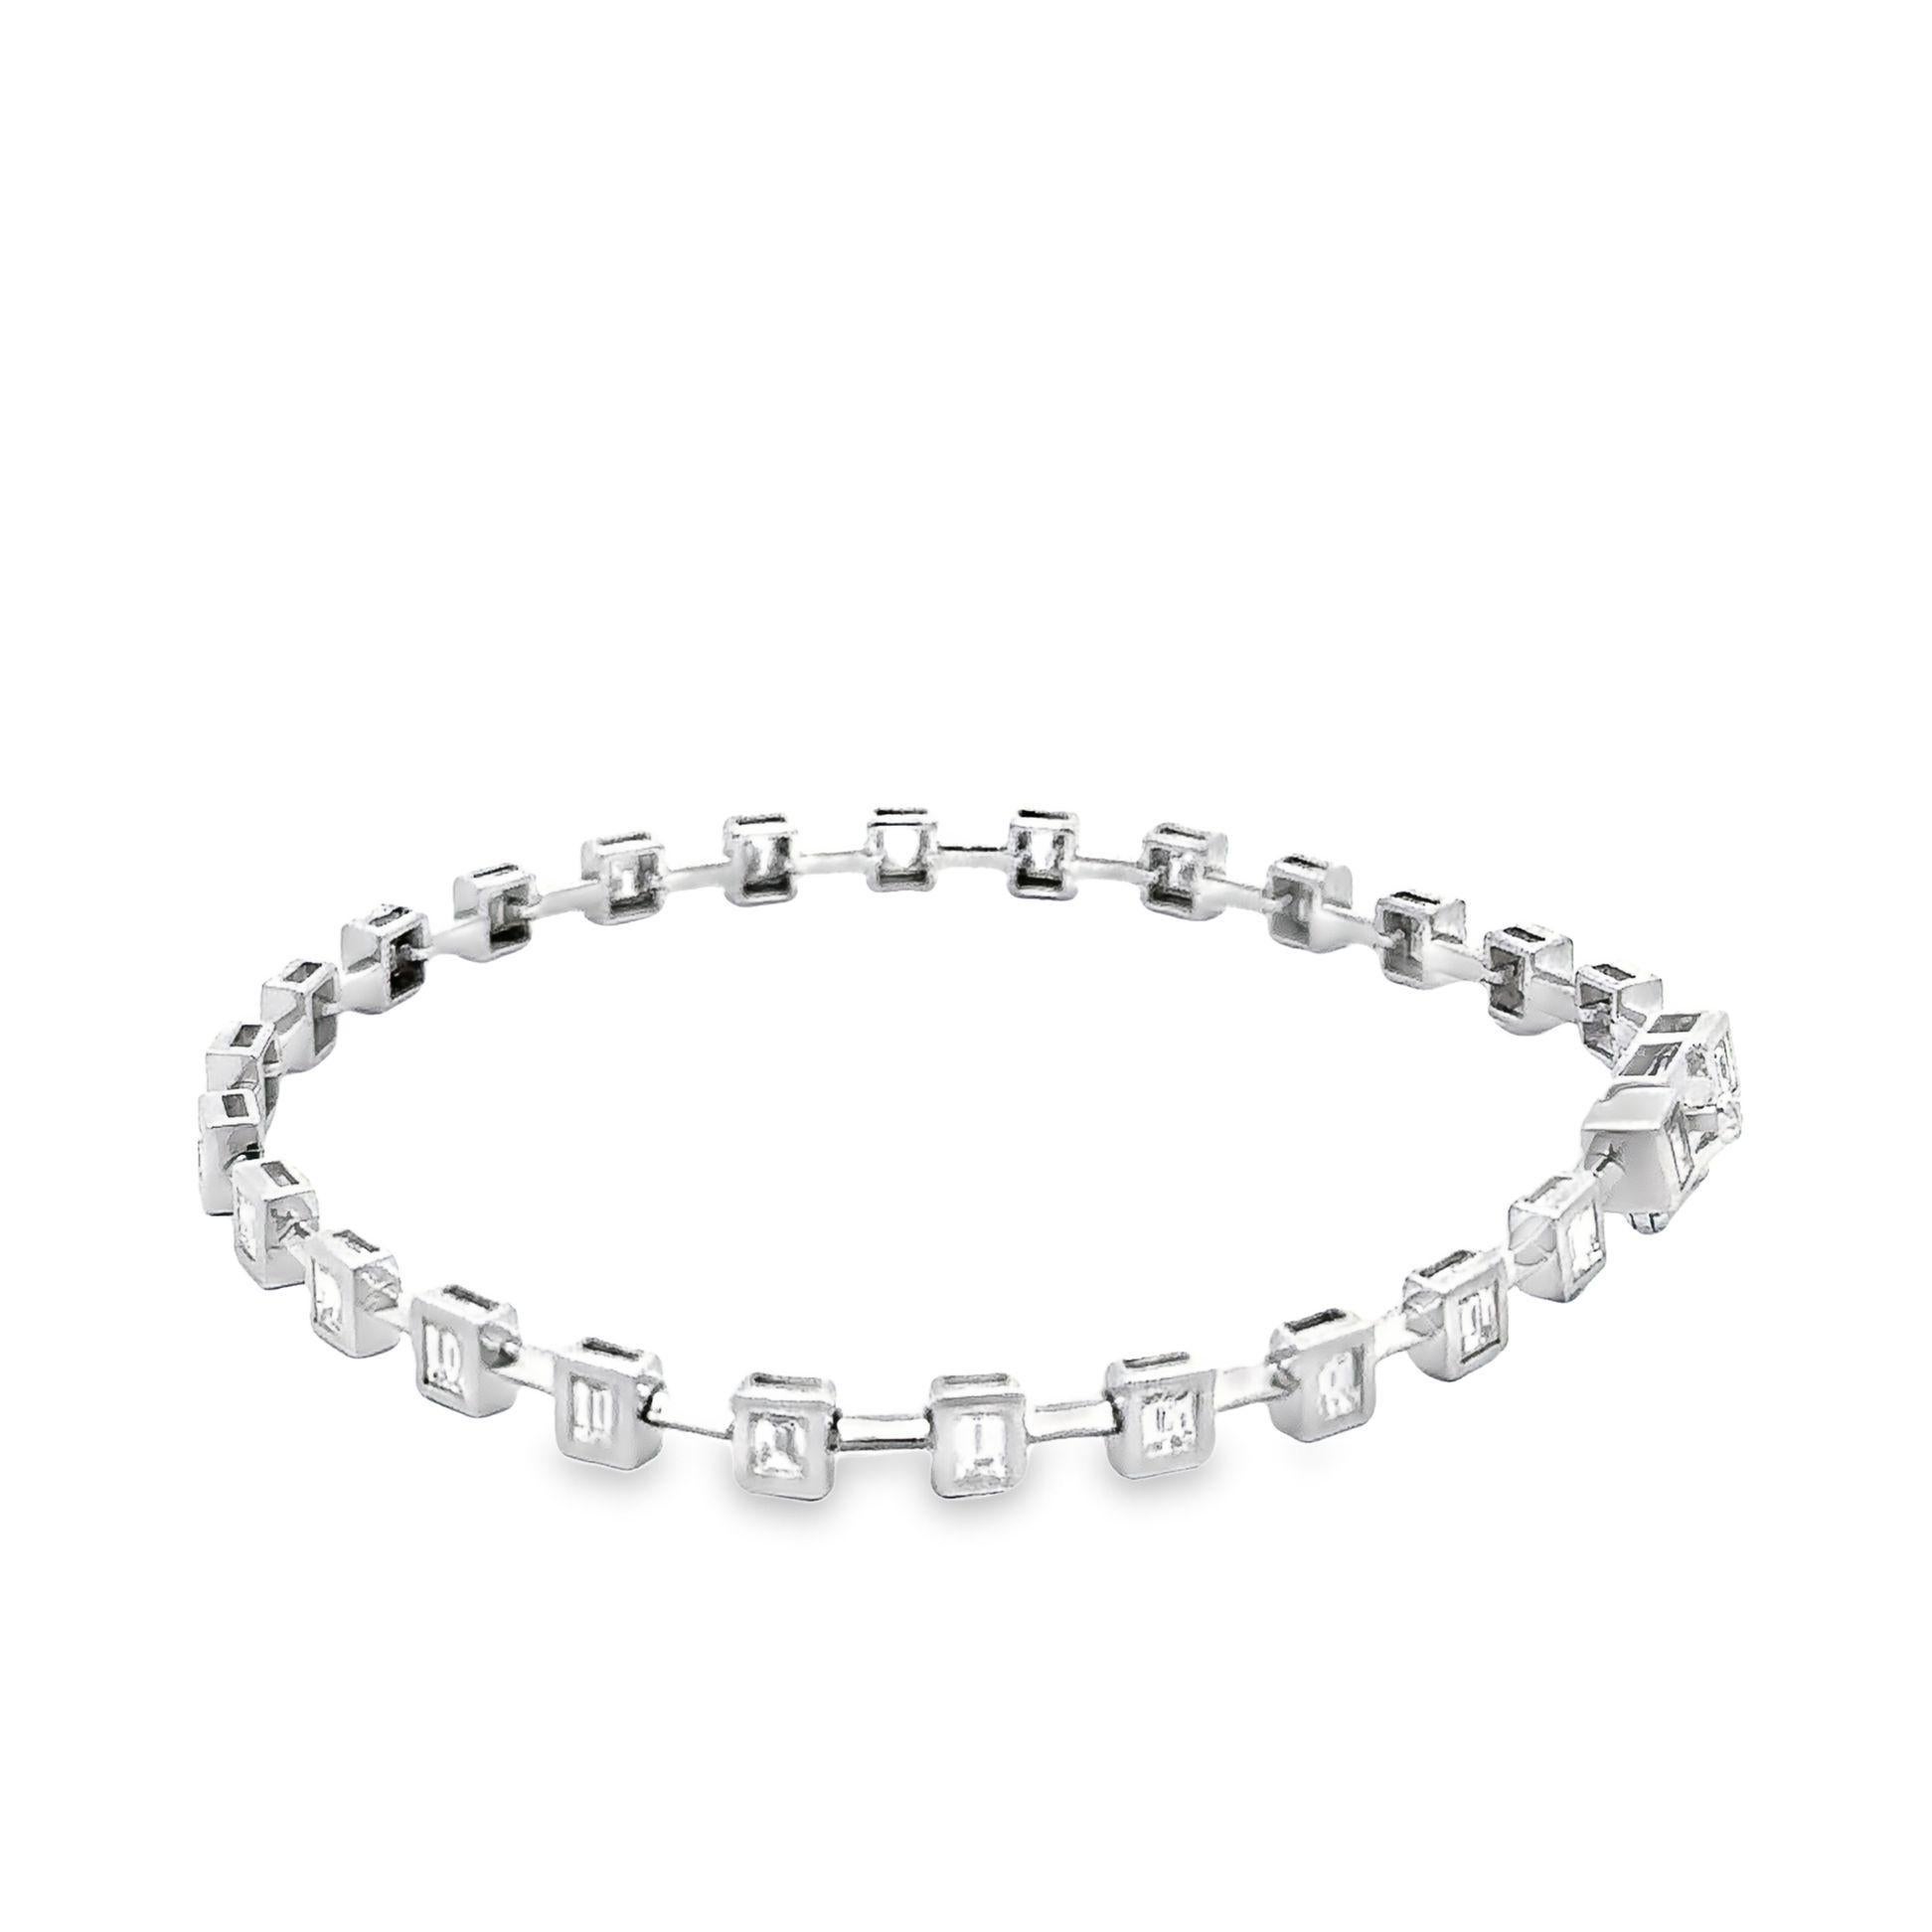 This luxurious bracelet alternates baguette-cut diamonds weighing a total of 3.52 carats. Stylish, timeless, and subtle, this bar station tennis bracelet is a forever piece as the 0.26 carat baguette-cut diamonds feature strong fire and radiance.